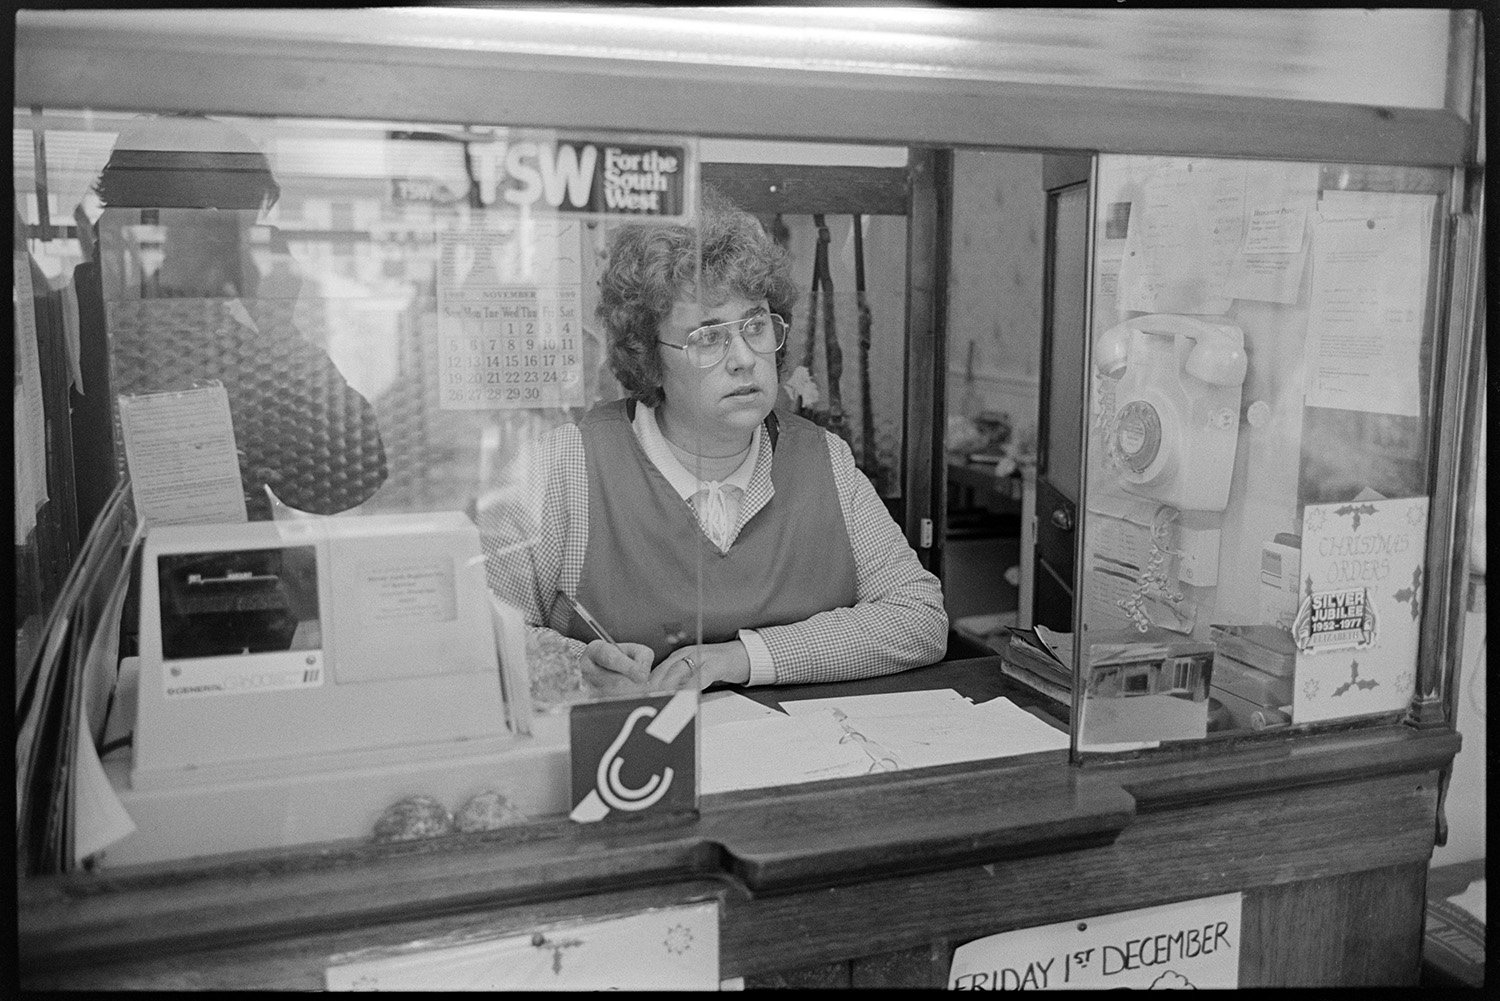 Butchers shop, proprietor and customers, cash desk, butcher weighing meat. 
[A woman at the till kiosk in W Cann butcher's shop in South Molton Street, Chulmleigh. She is writing in a notebook by the cash register. A telephone is fixed to the wall.]